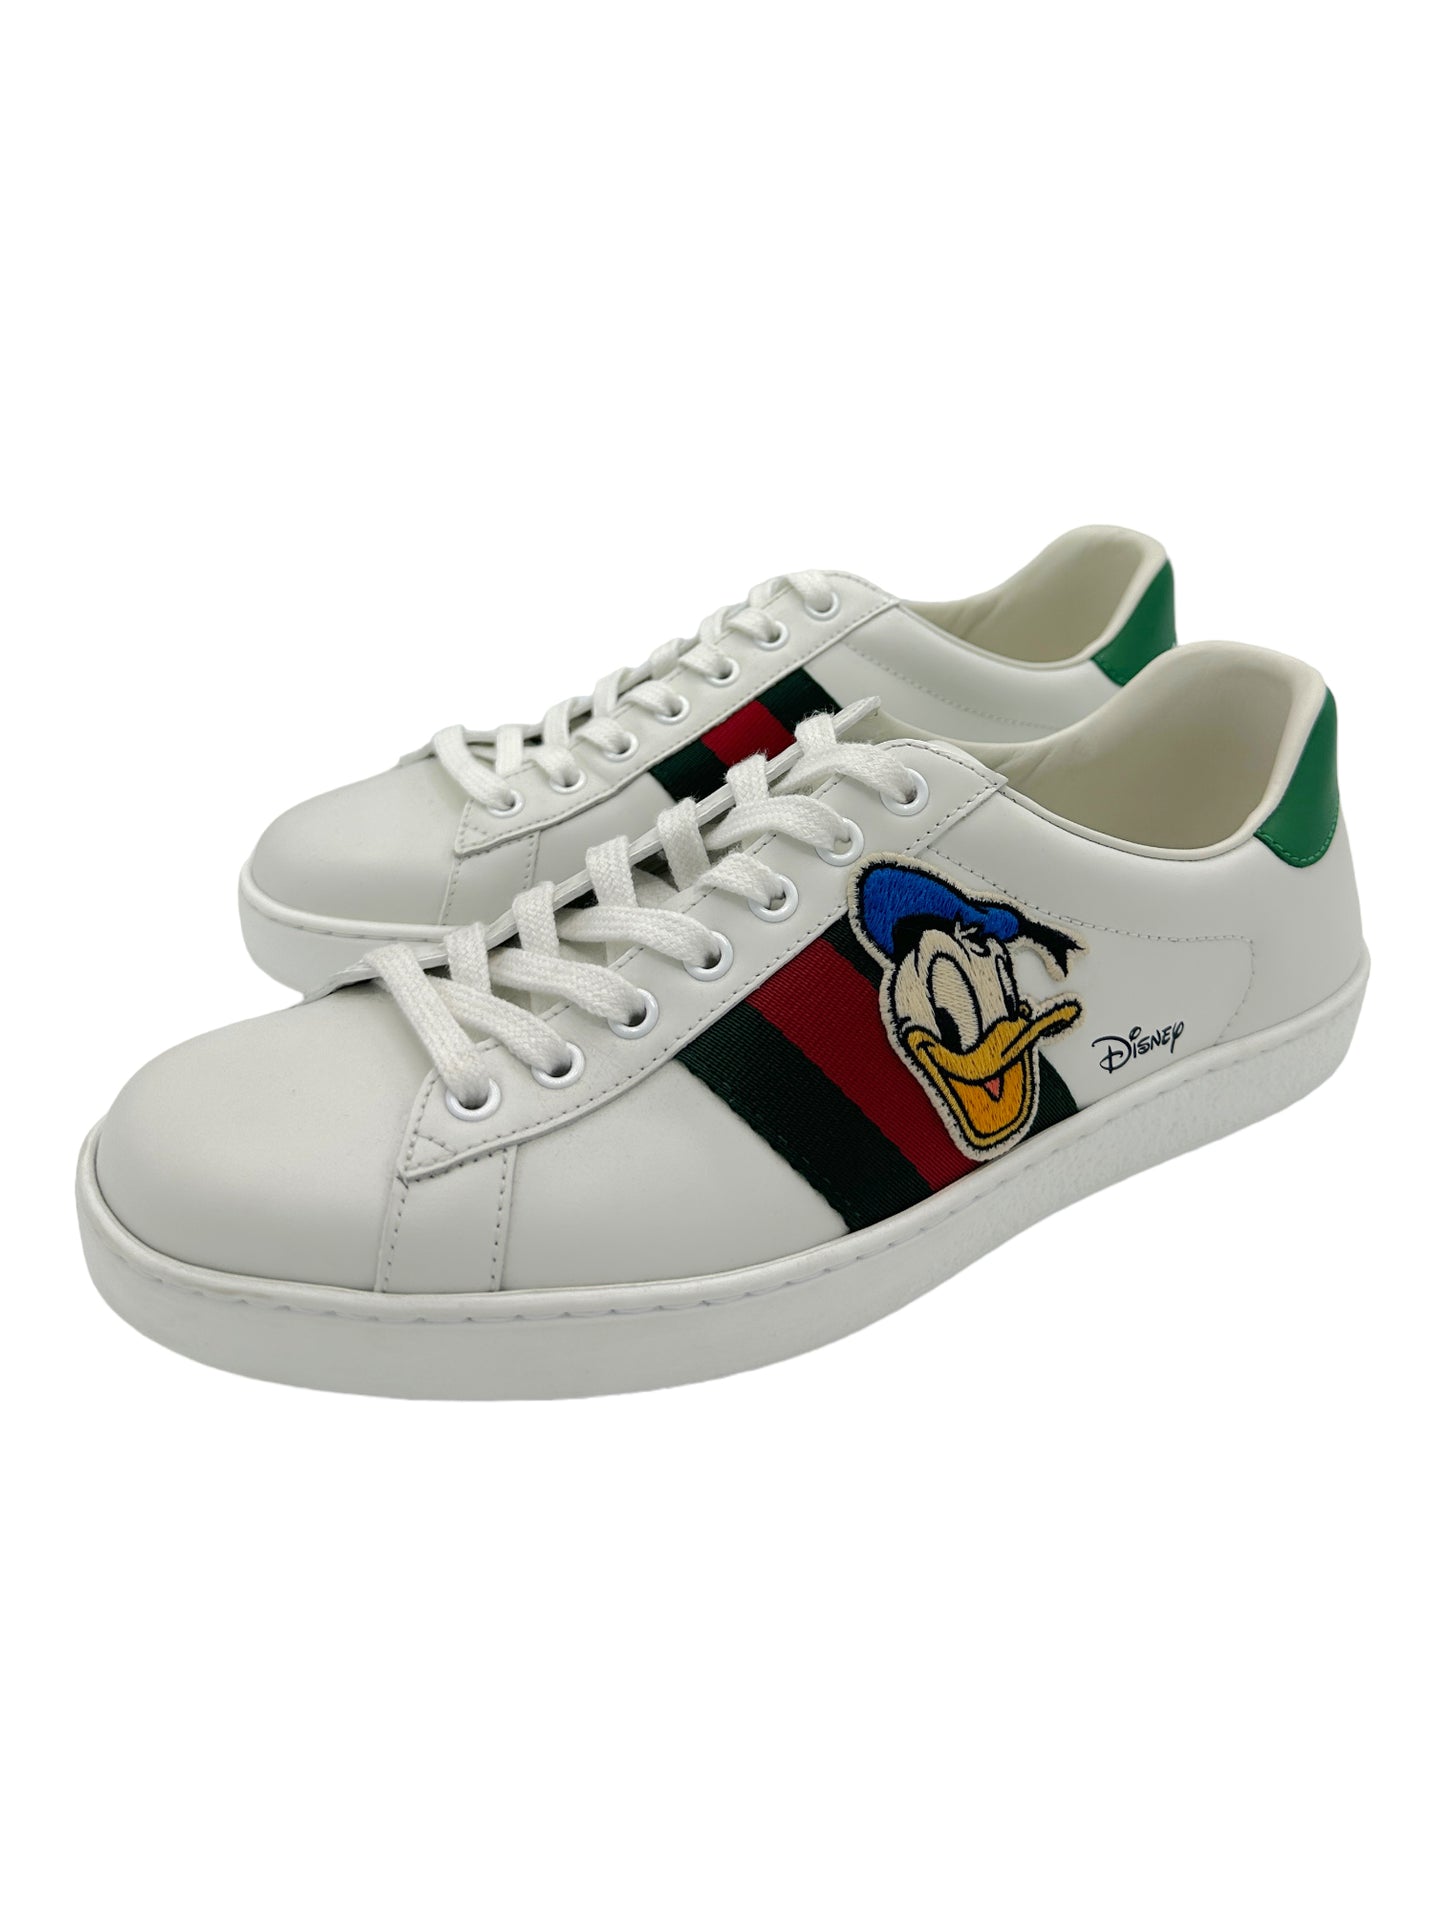 Gucci X Disney Ace Donald Duck Low Leather Trainer Sneakers